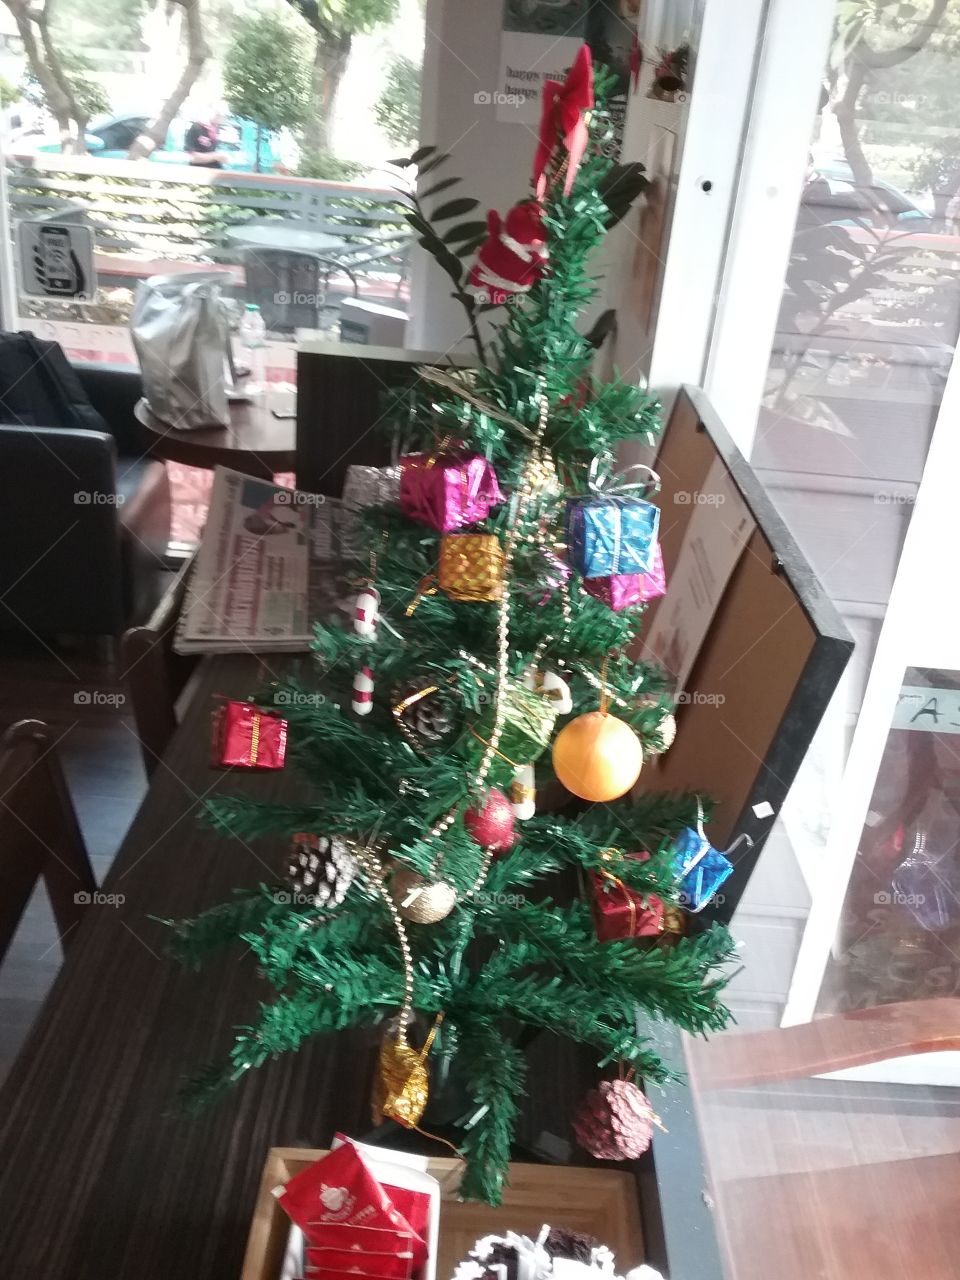 Another side of the world where you can see a Christmas tree everyday in a coffee shop, Bangkok, Thailand.